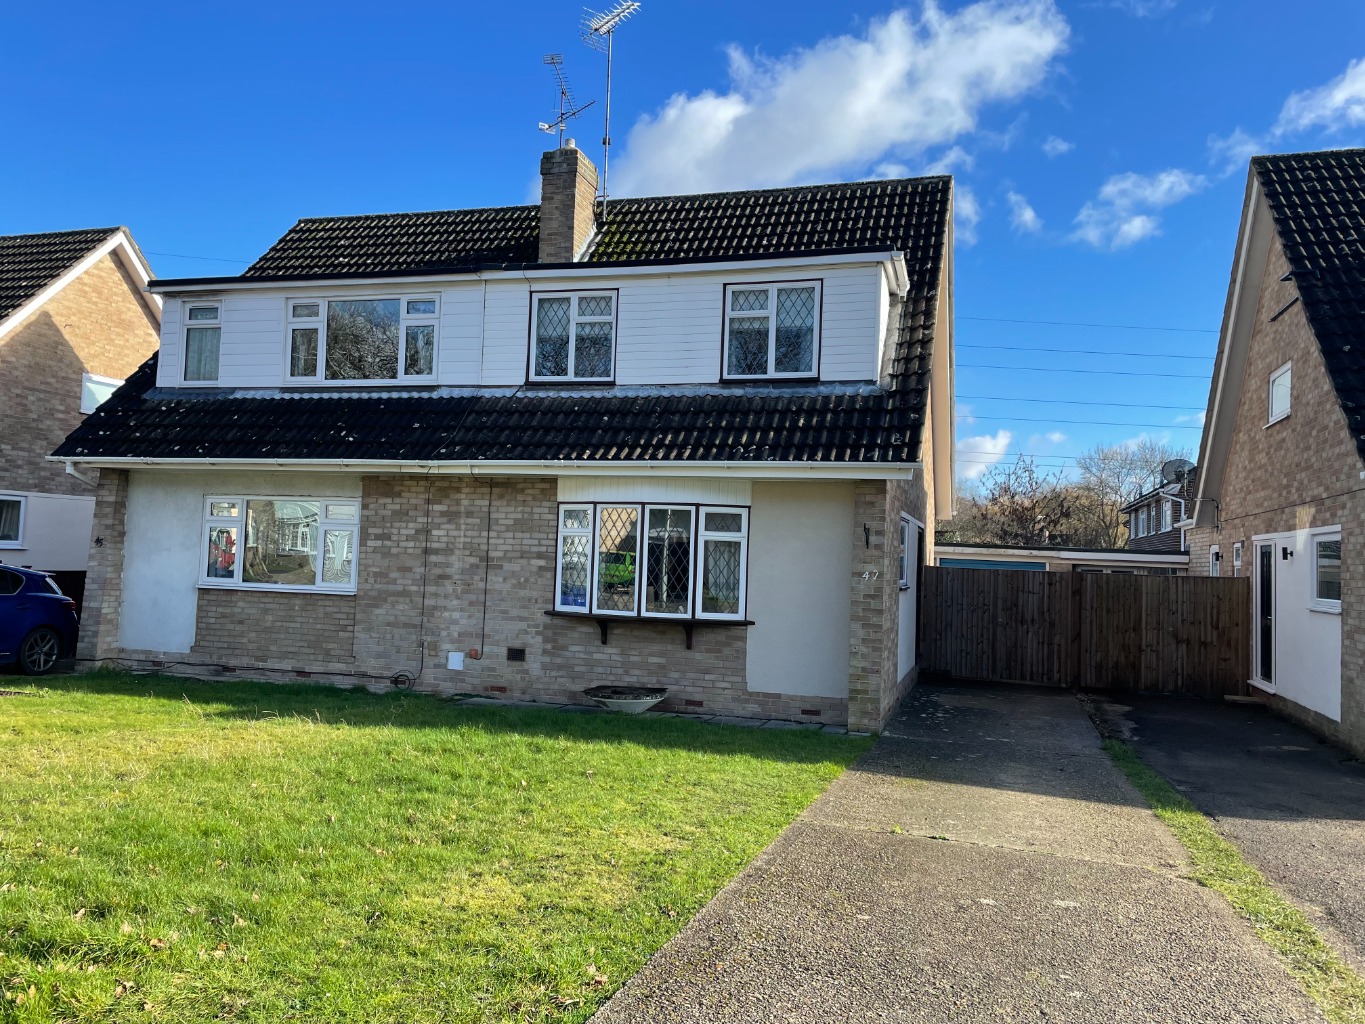 A great opportunity to put your own stamp on a three bedroom semi detached house in Hazel Drive in Woodley. There are no onward chain complications, the house is liveable as it is however modernisation is required. An ideal first project!